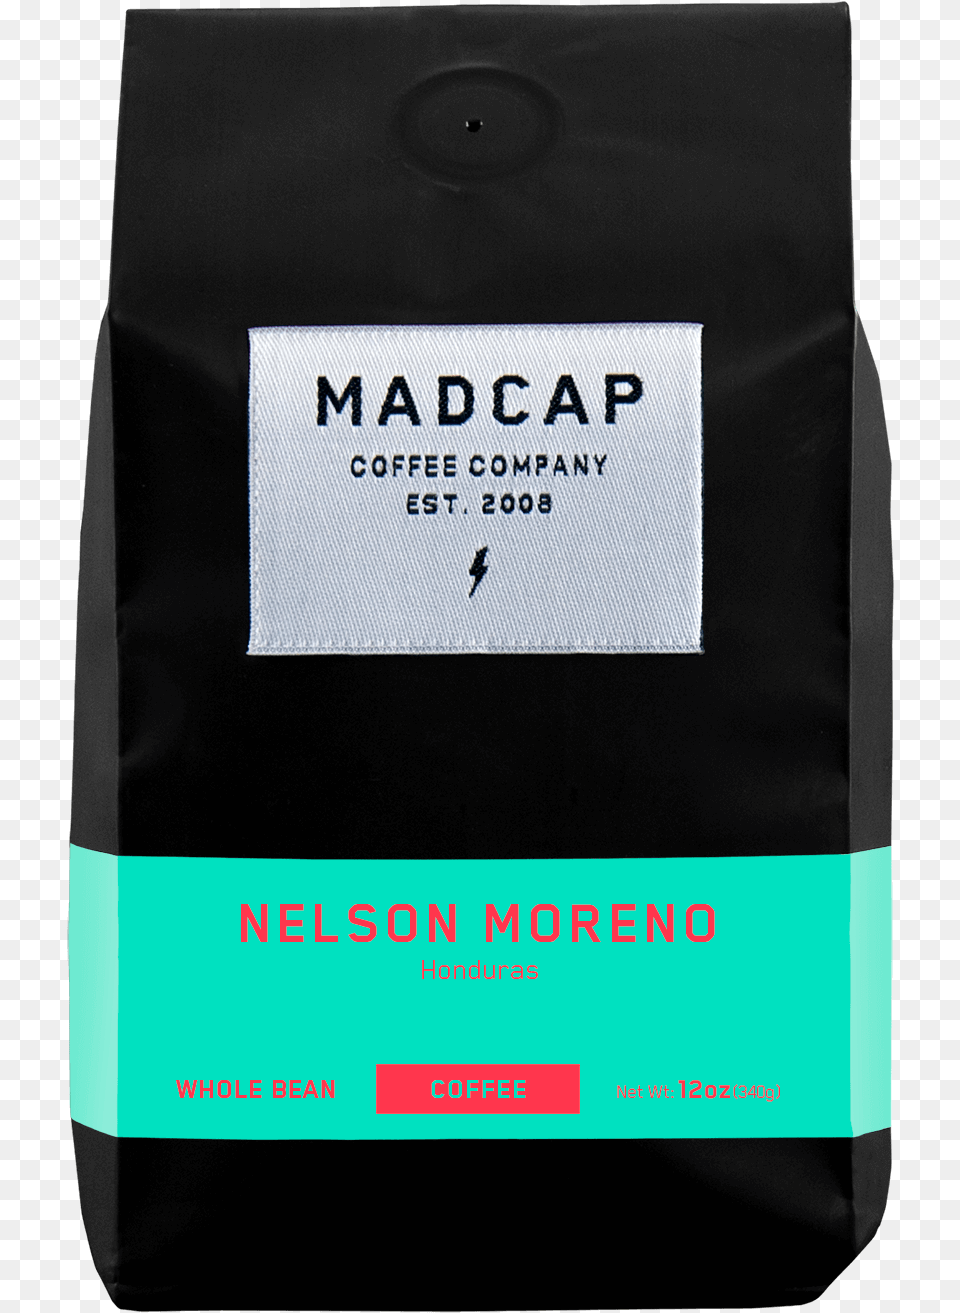 Madcap Coffee Old Packaging, Bottle, Bag, Aftershave, Business Card Png